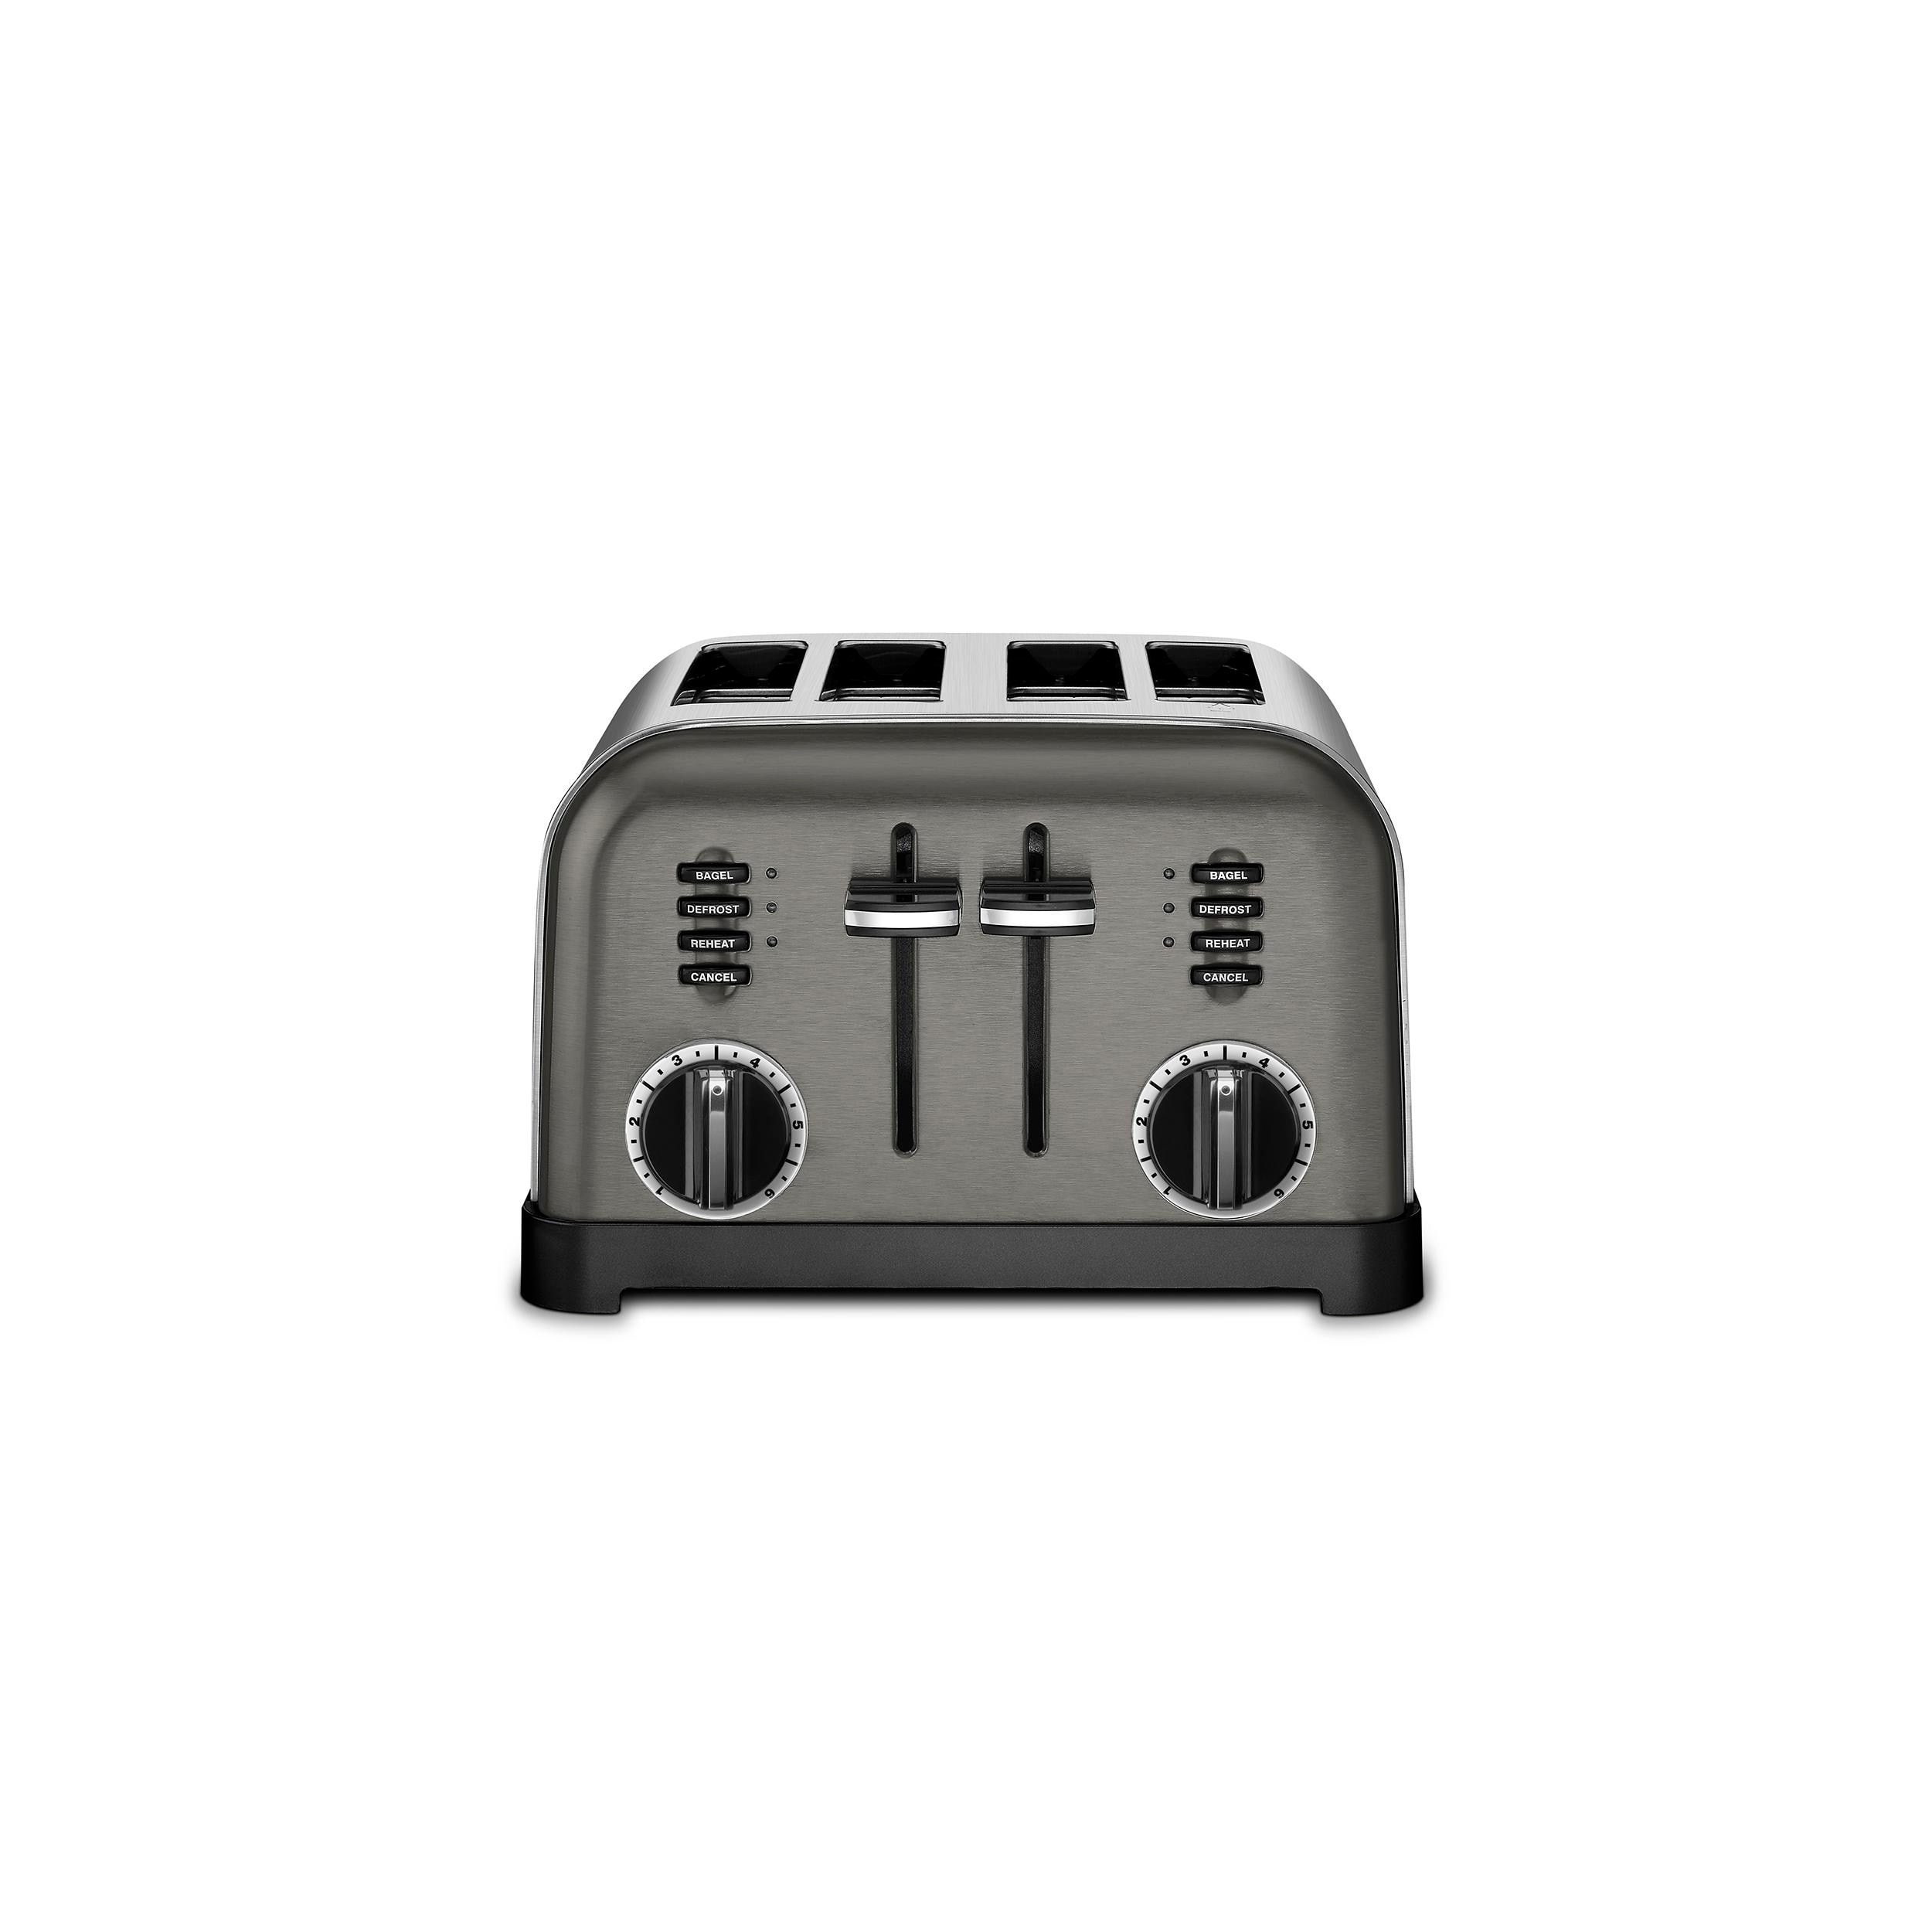 https://ak1.ostkcdn.com/images/products/is/images/direct/424a3cde721fd38d2fce88443ef99dcbd4edb564/4-Slice-Metal-Classic-Toaster.jpg